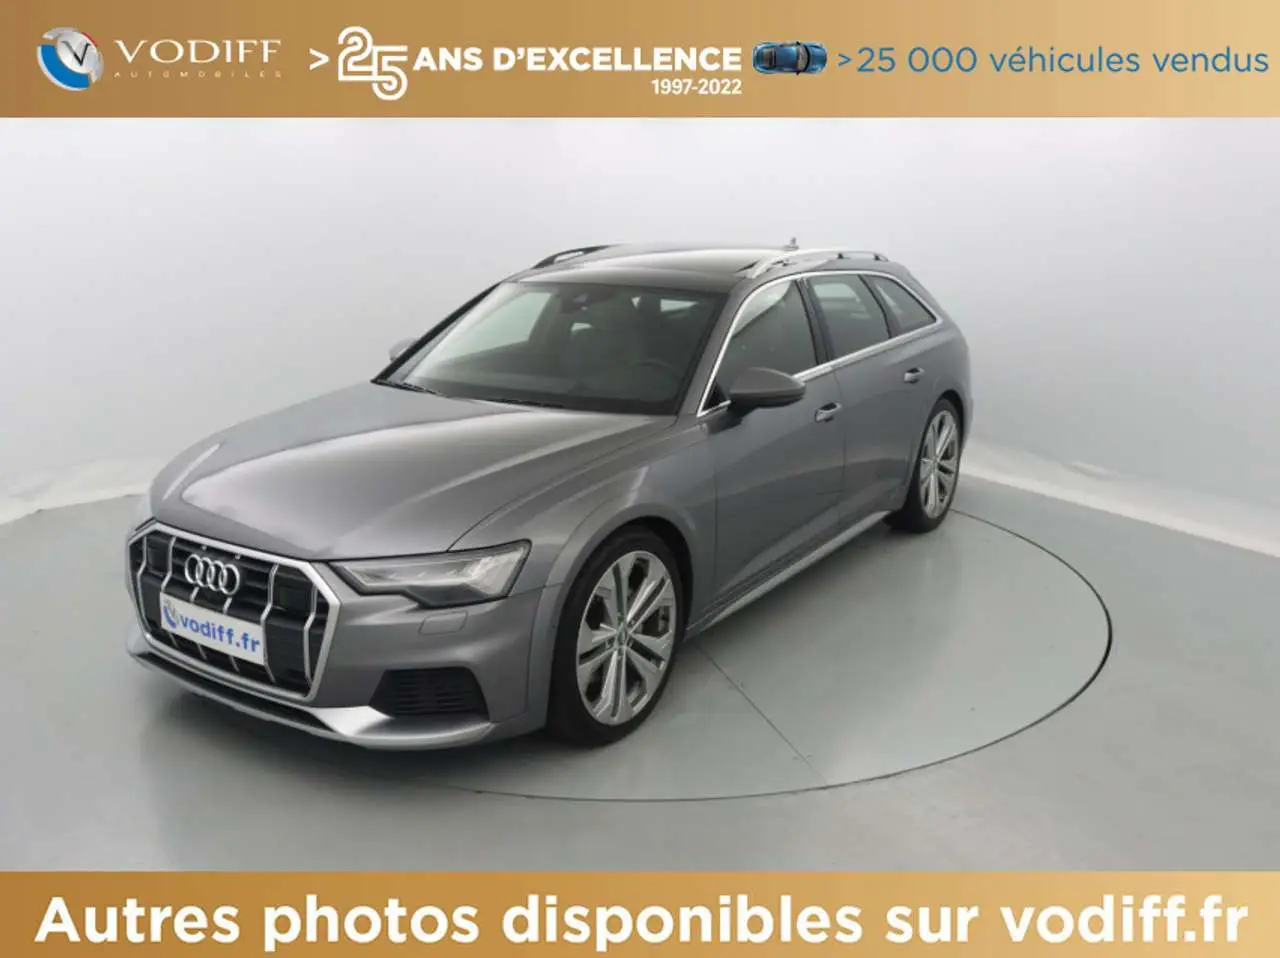 Photo 1 : Audi A6 2020 Others